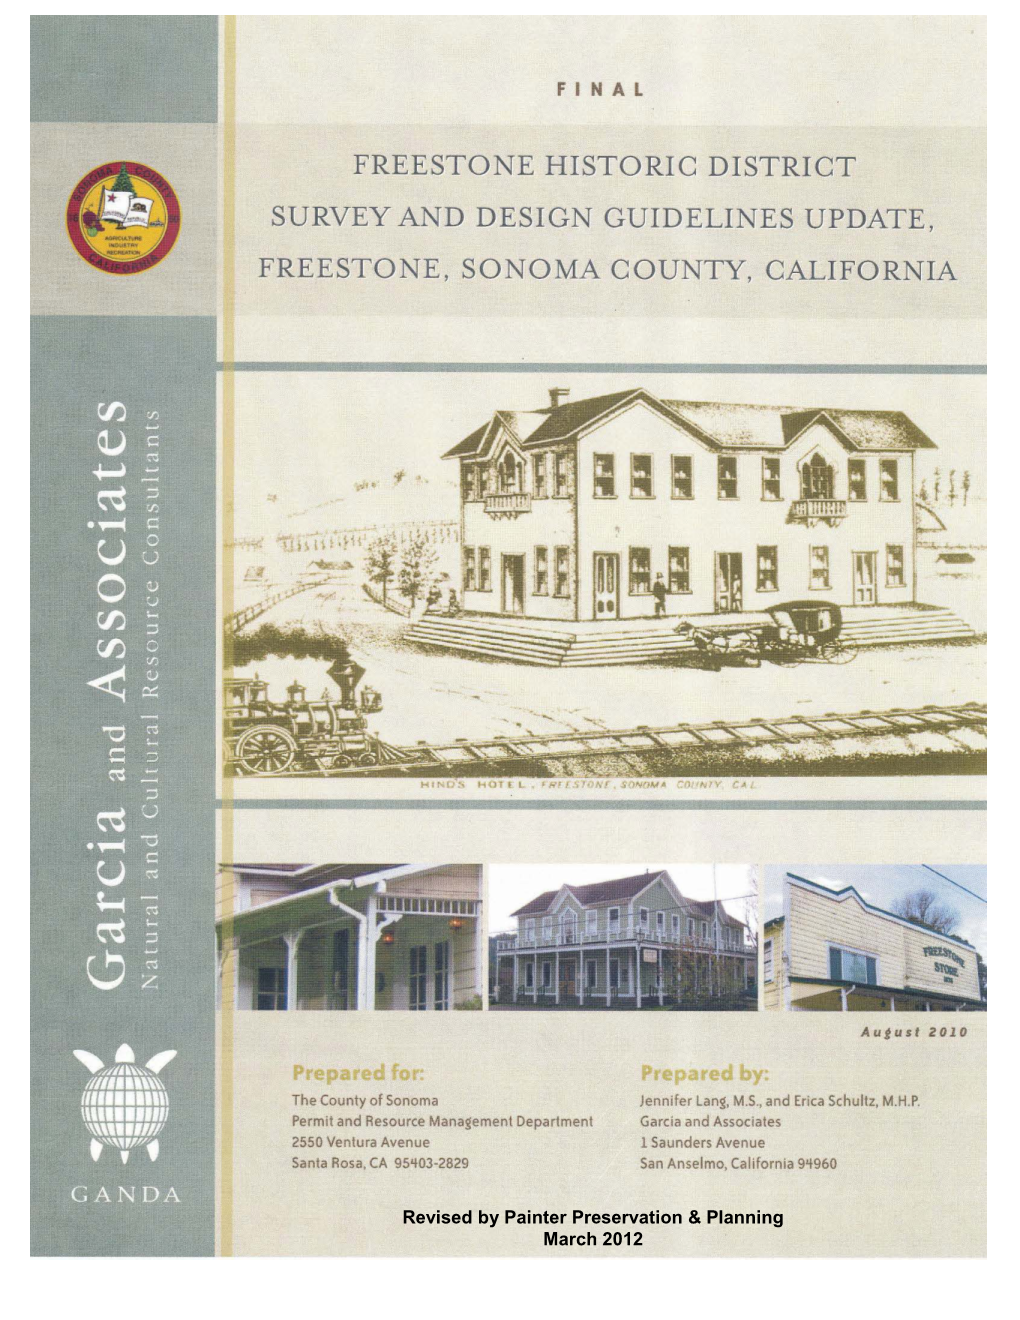 Freestone Historic District Survey and Design Guidelines Update Includes the Following Components